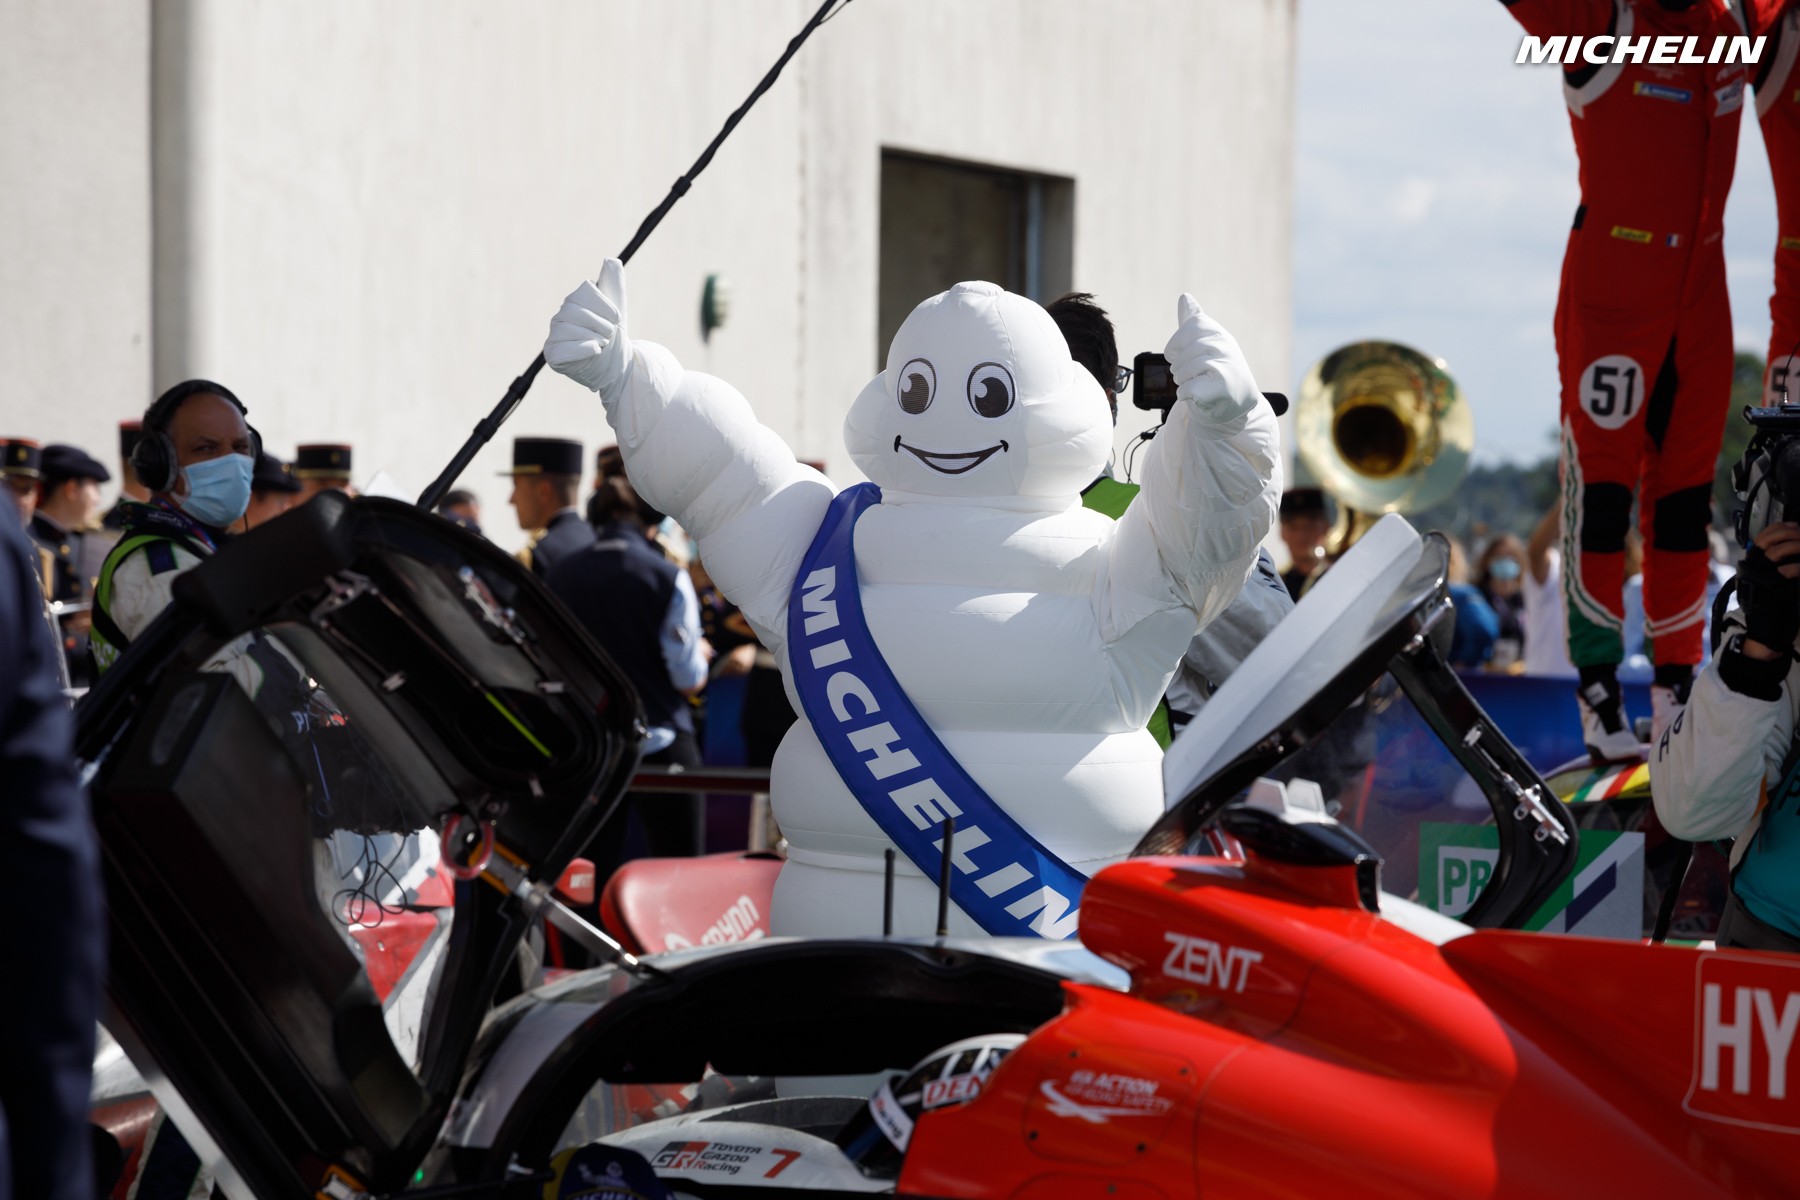 Michelin suspending production at some European plants